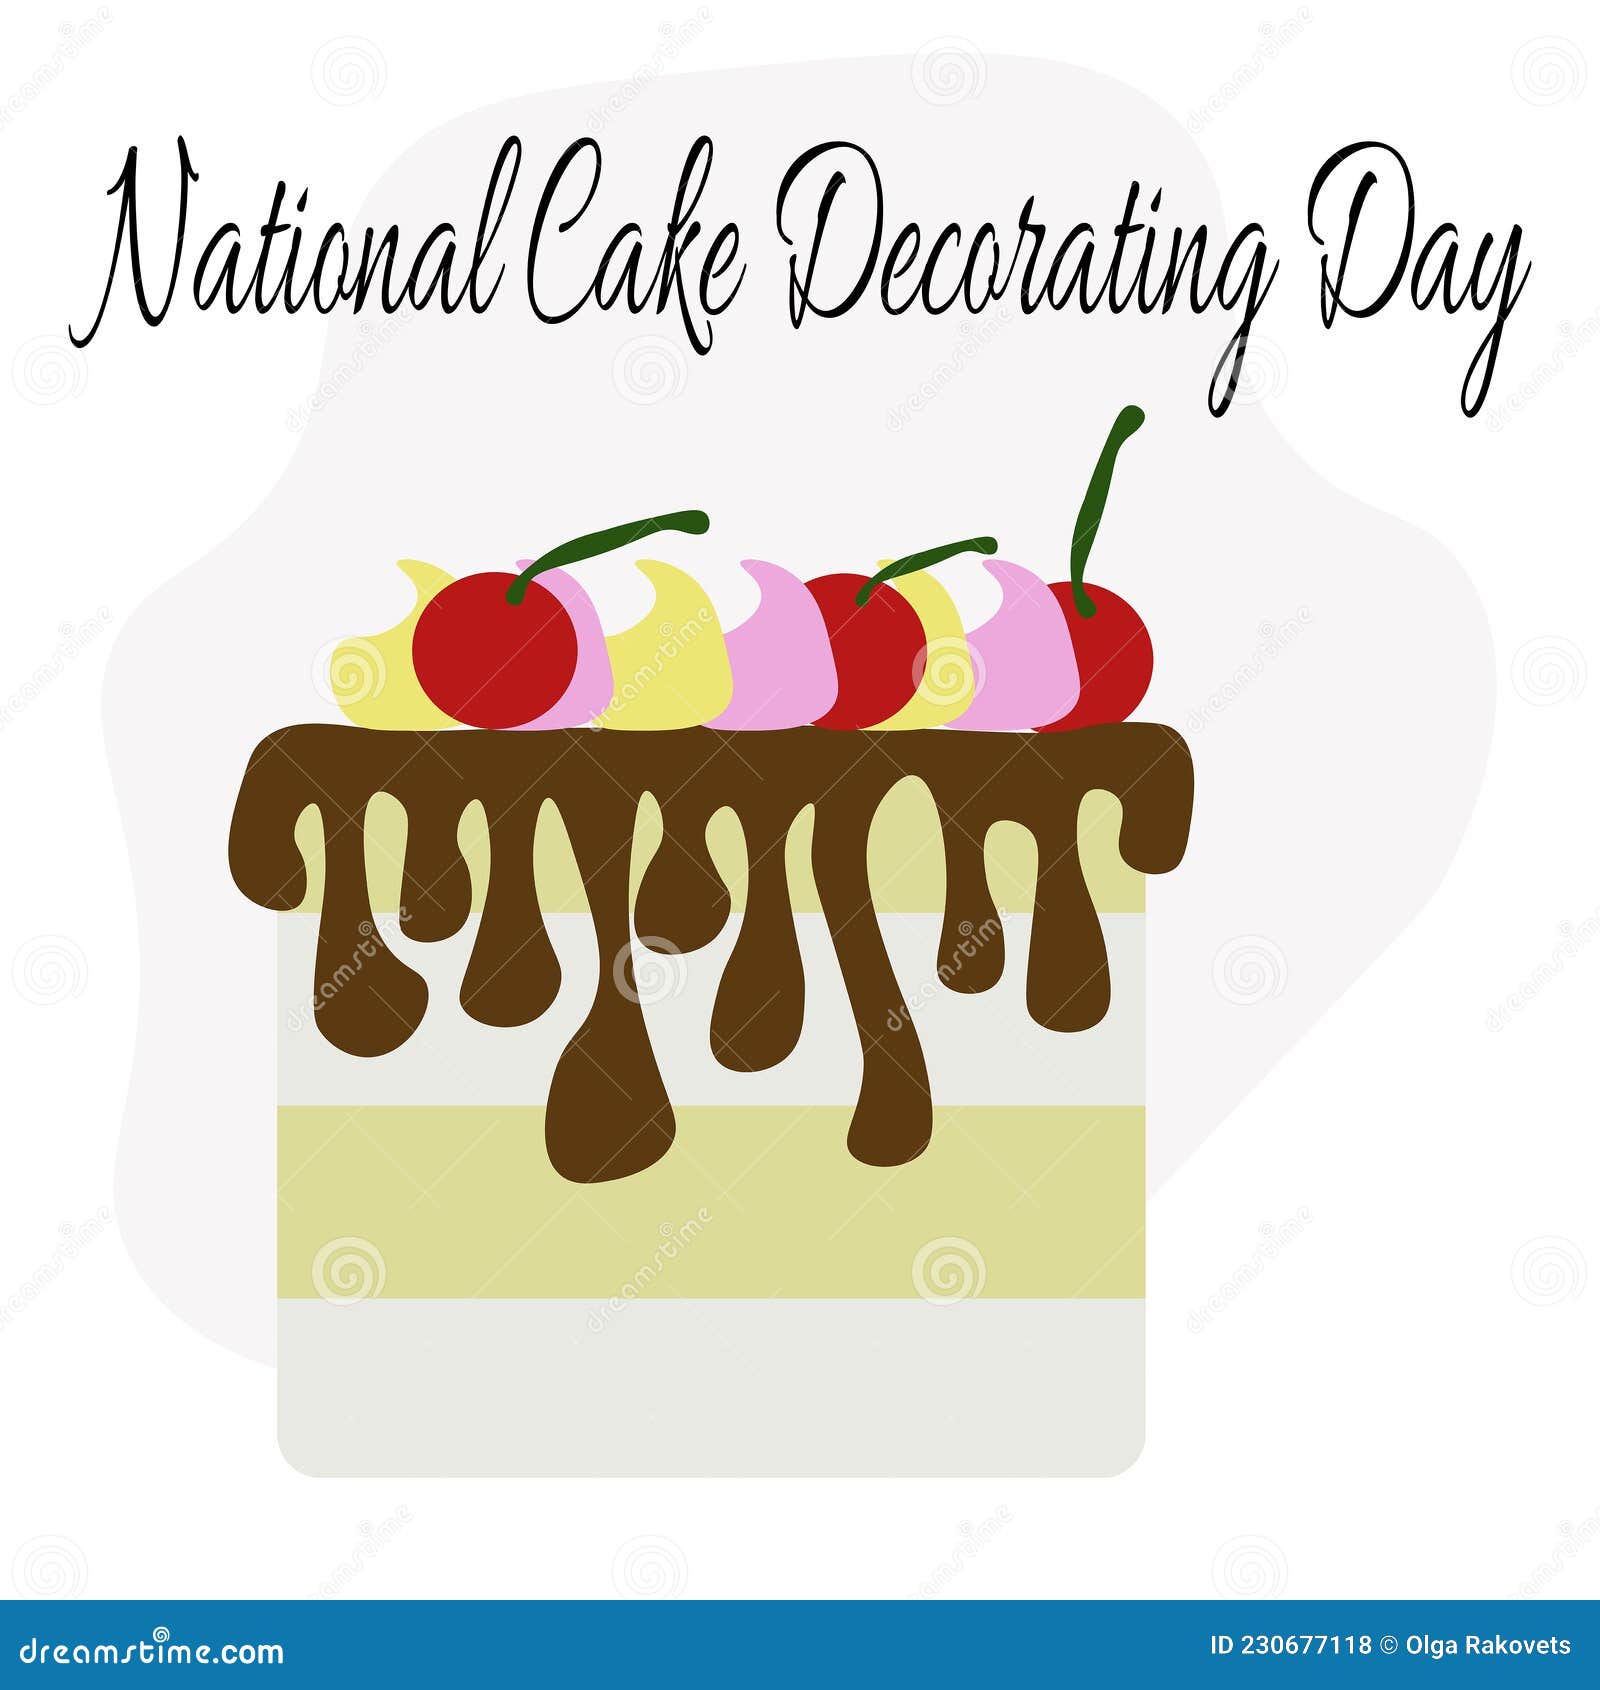 All About national cake decorating day 13 Tháng 10